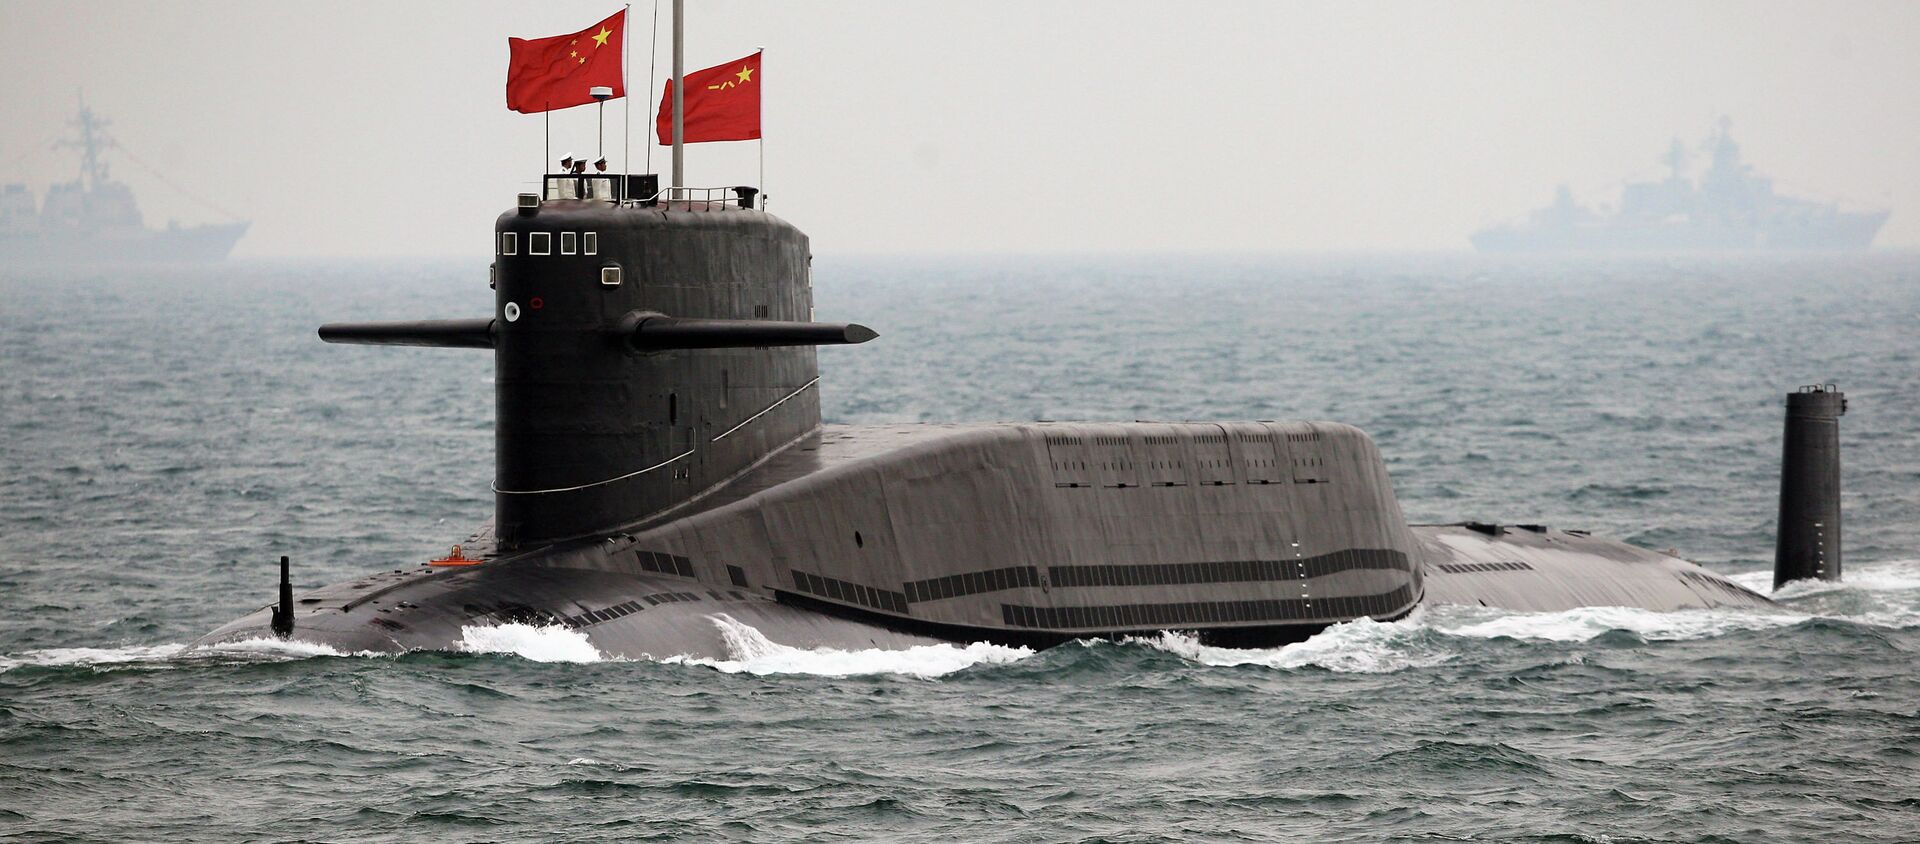 File photo, a Chinese Navy nuclear-powered submarine sails during an international fleet review to celebrate the 60th anniversary of the founding of People's Liberation Army Navy - Sputnik International, 1920, 01.08.2019